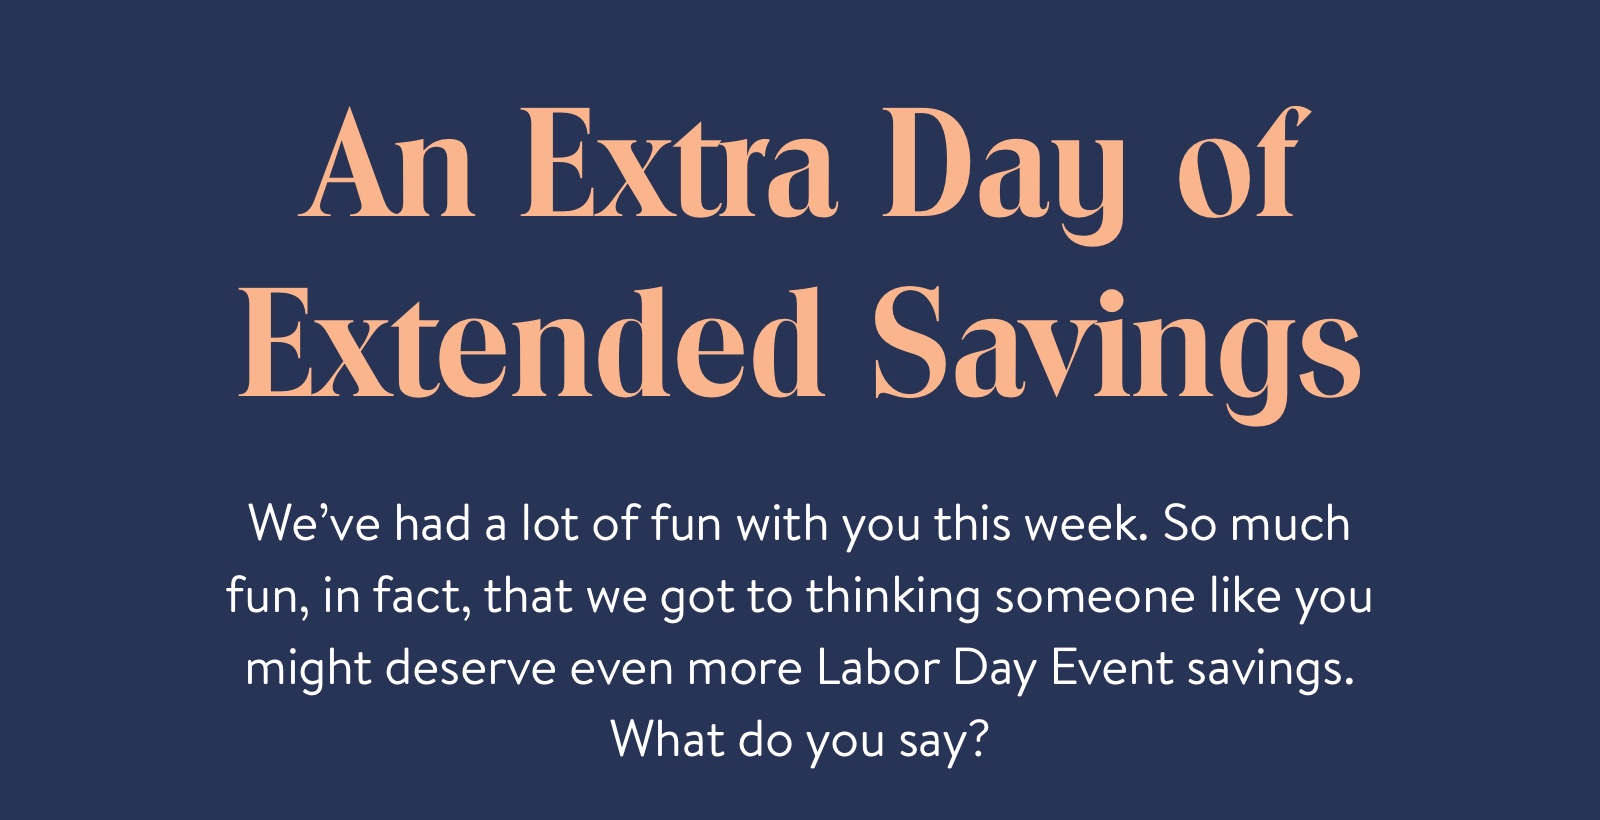 An Extra Day of Extended Savings